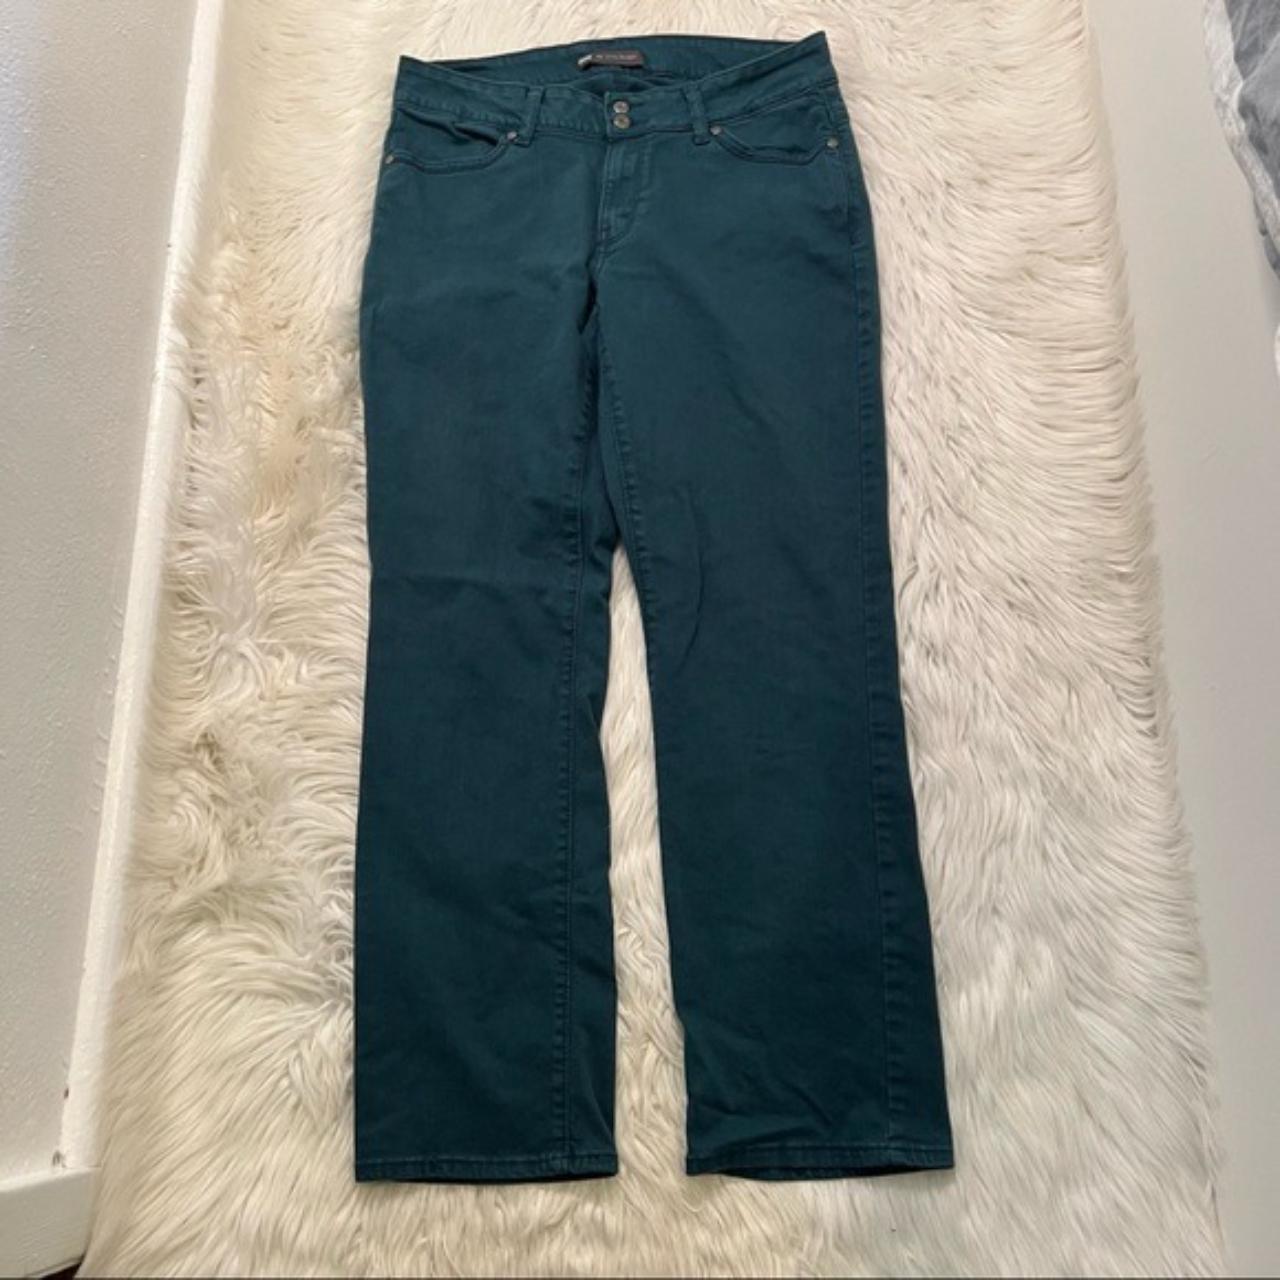 Levi's Women's Blue and Green Jeans | Depop